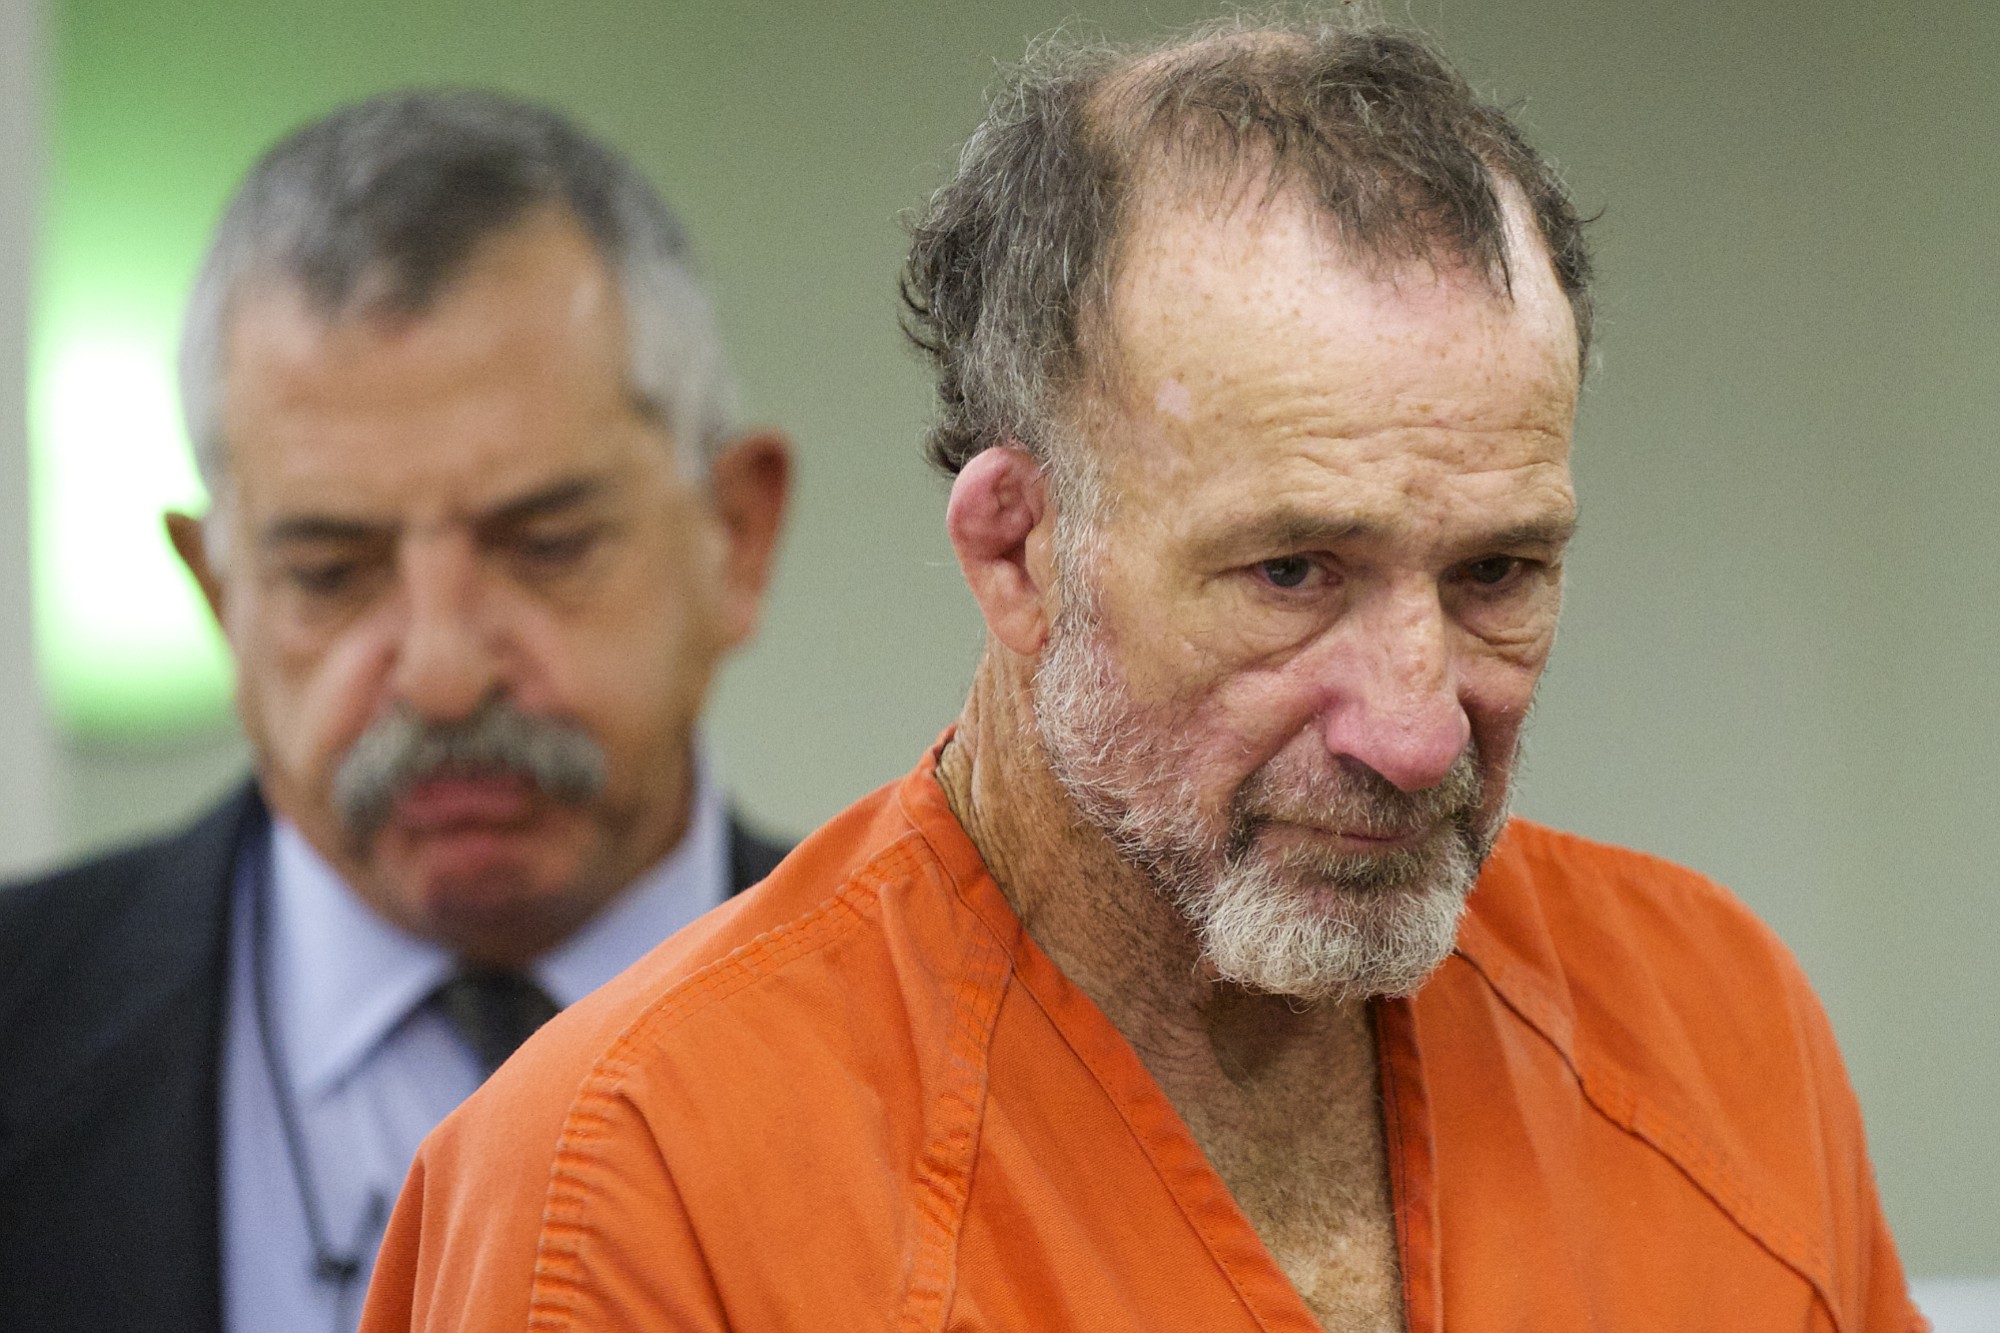 Jack Raymond Yancey, 58, appears in Clark County Superior Court on Sept. 26, 2014, on suspicion of stabbing a Vancouver man to death.